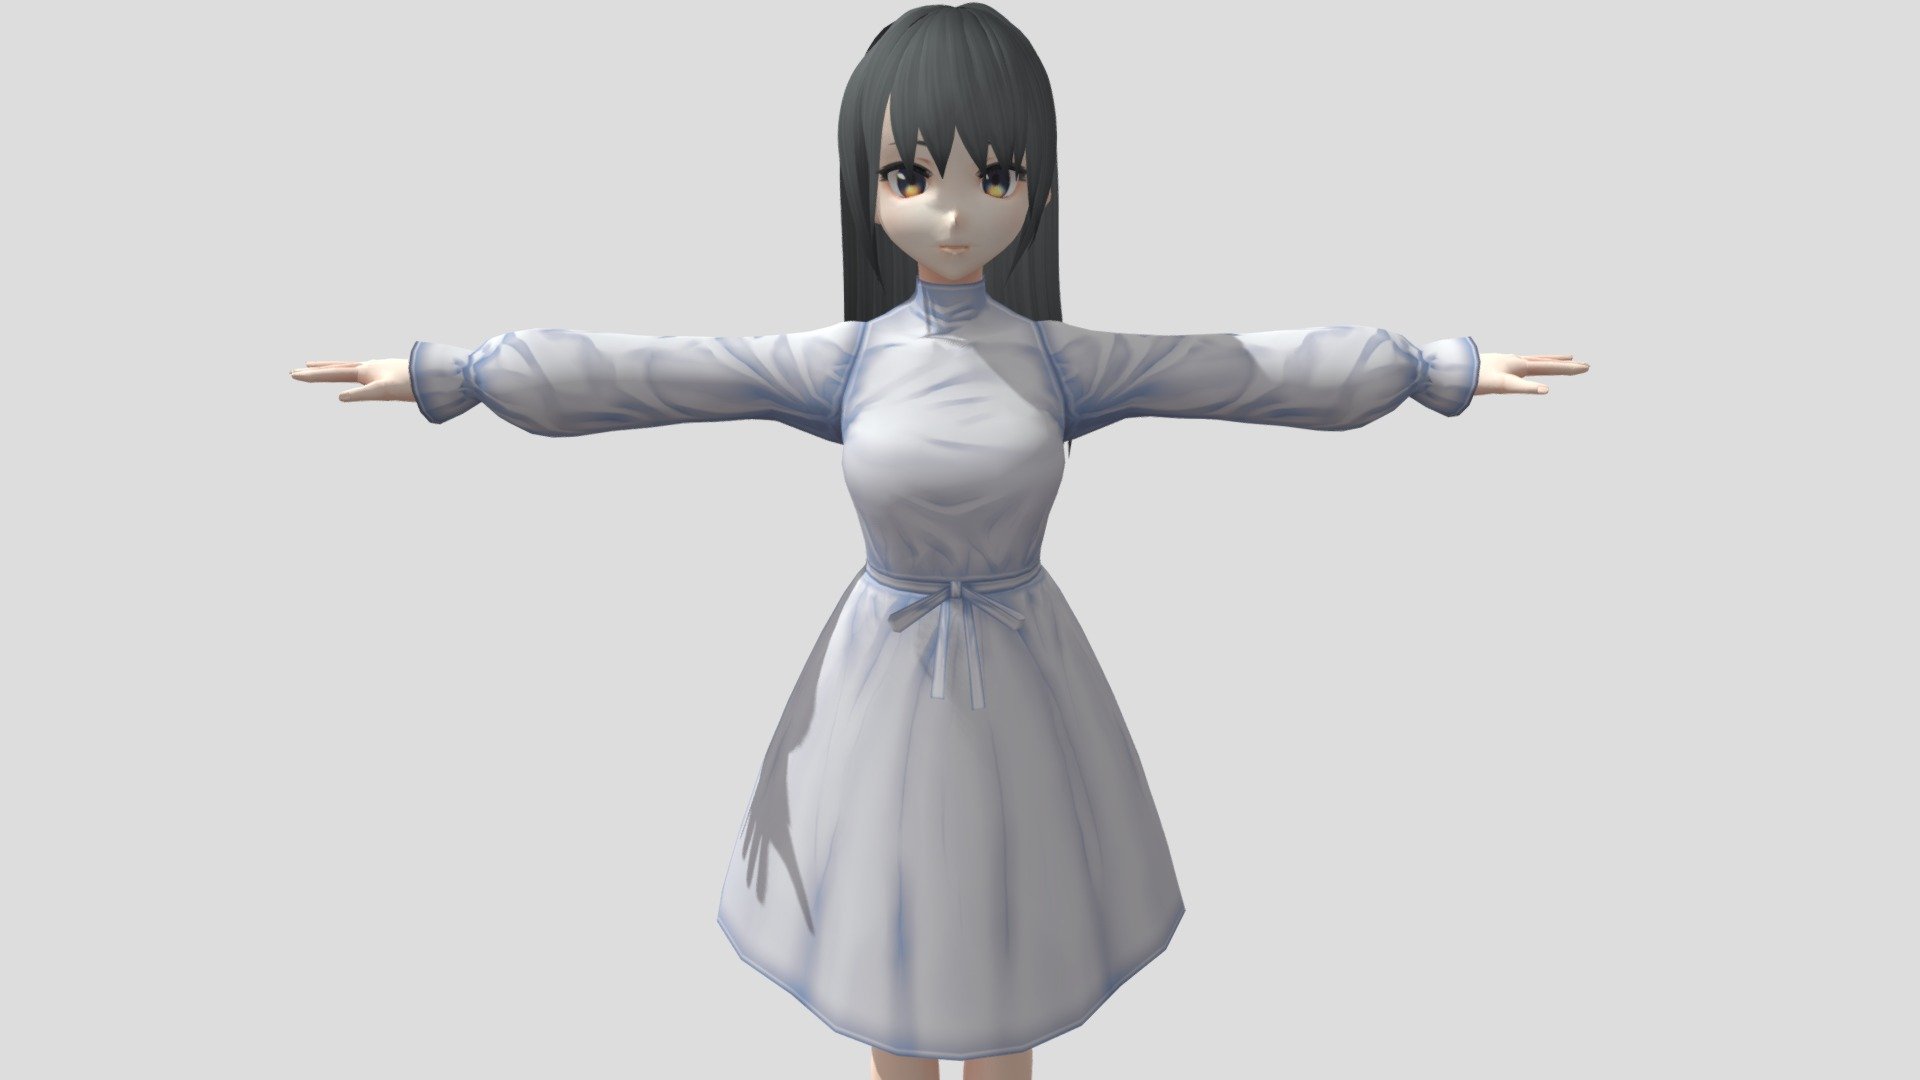 Model preview



This character model belongs to Japanese anime style, all models has been converted into fbx file using blender, users can add their favorite animations on mixamo website, then apply to unity versions above 2019



Character : Arisa

Verts:16305

Tris:23570

Fourteen textures for the character



Character : Xiang

Verts:27673

Tris:38220

Sixteen textures for the character



This package contains VRM files, which can make the character module more refined, please refer to the manual for details



▶Commercial use allowed

▶Forbid secondary sales



Welcome add my website to credit :

Sketchfab

Pixiv

VRoidHub
 - 【Anime Character】Arisa/Xiang (Unity 3D) - Buy Royalty Free 3D model by 3D動漫風角色屋 / 3D Anime Character Store (@alex94i60) 3d model